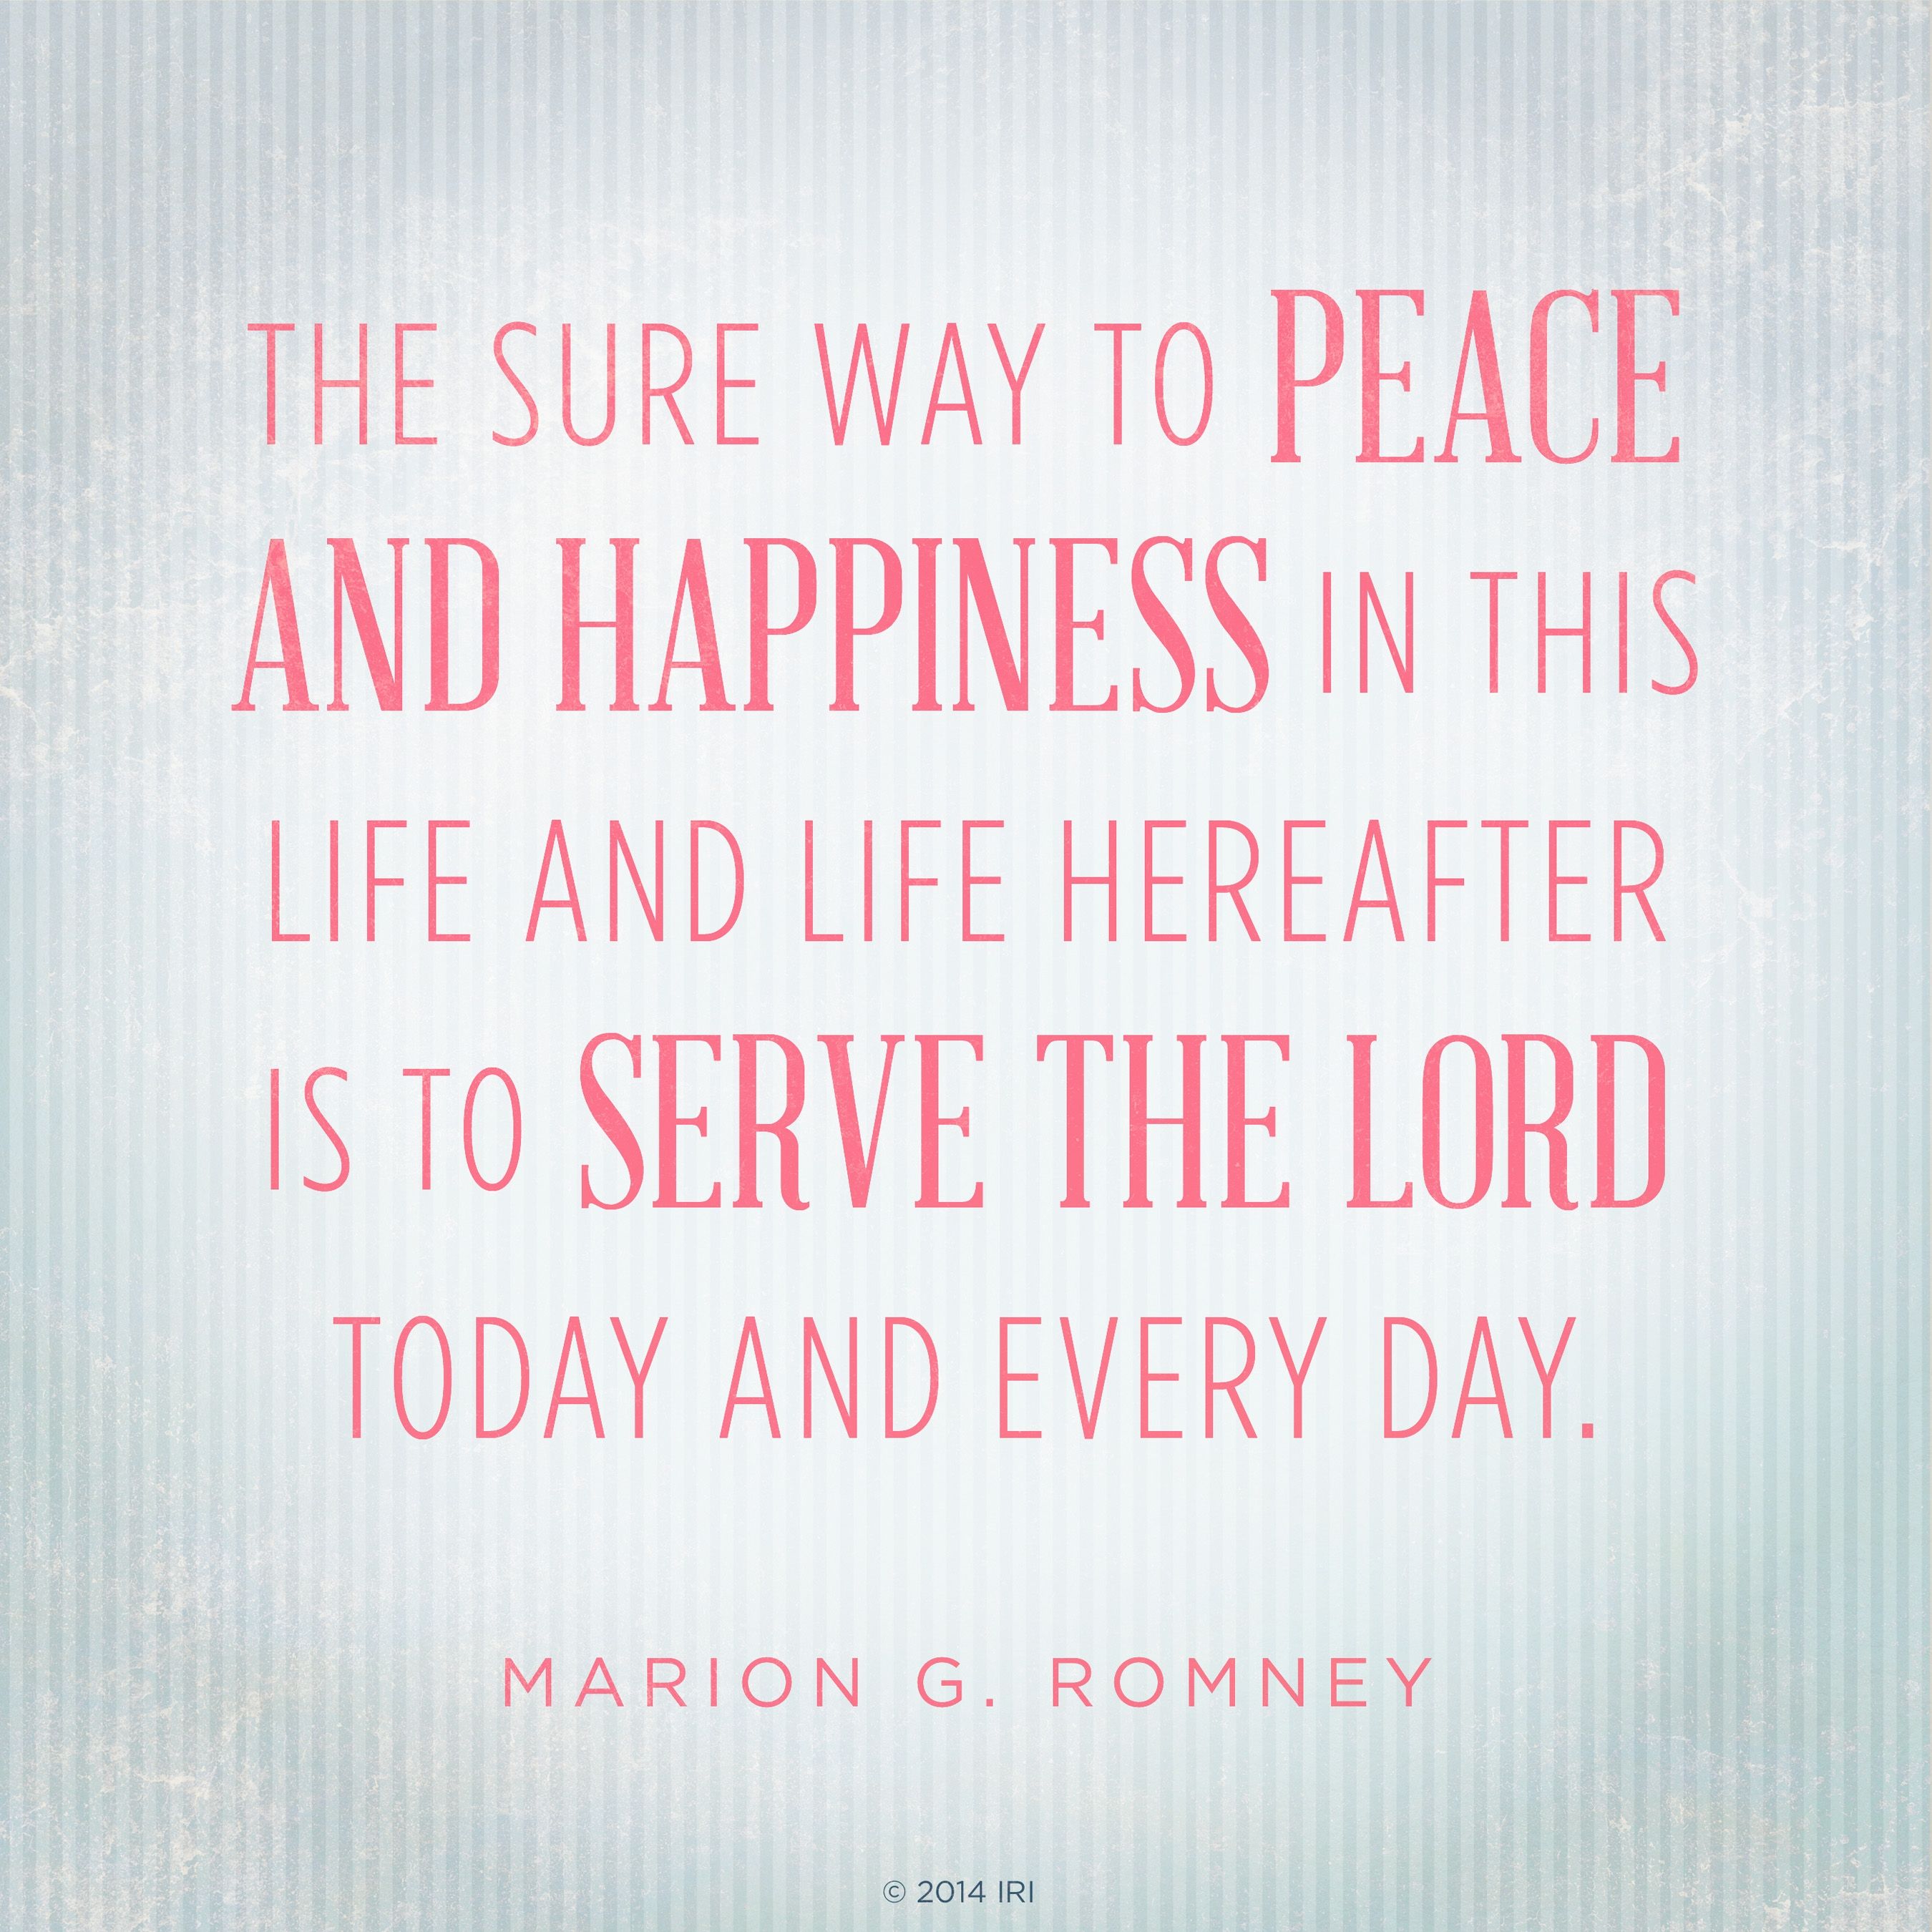 “The sure way to peace and happiness in this life and life hereafter is to serve the Lord today and every day.”—President Marion G. Romney, “Serve the Lord Today”